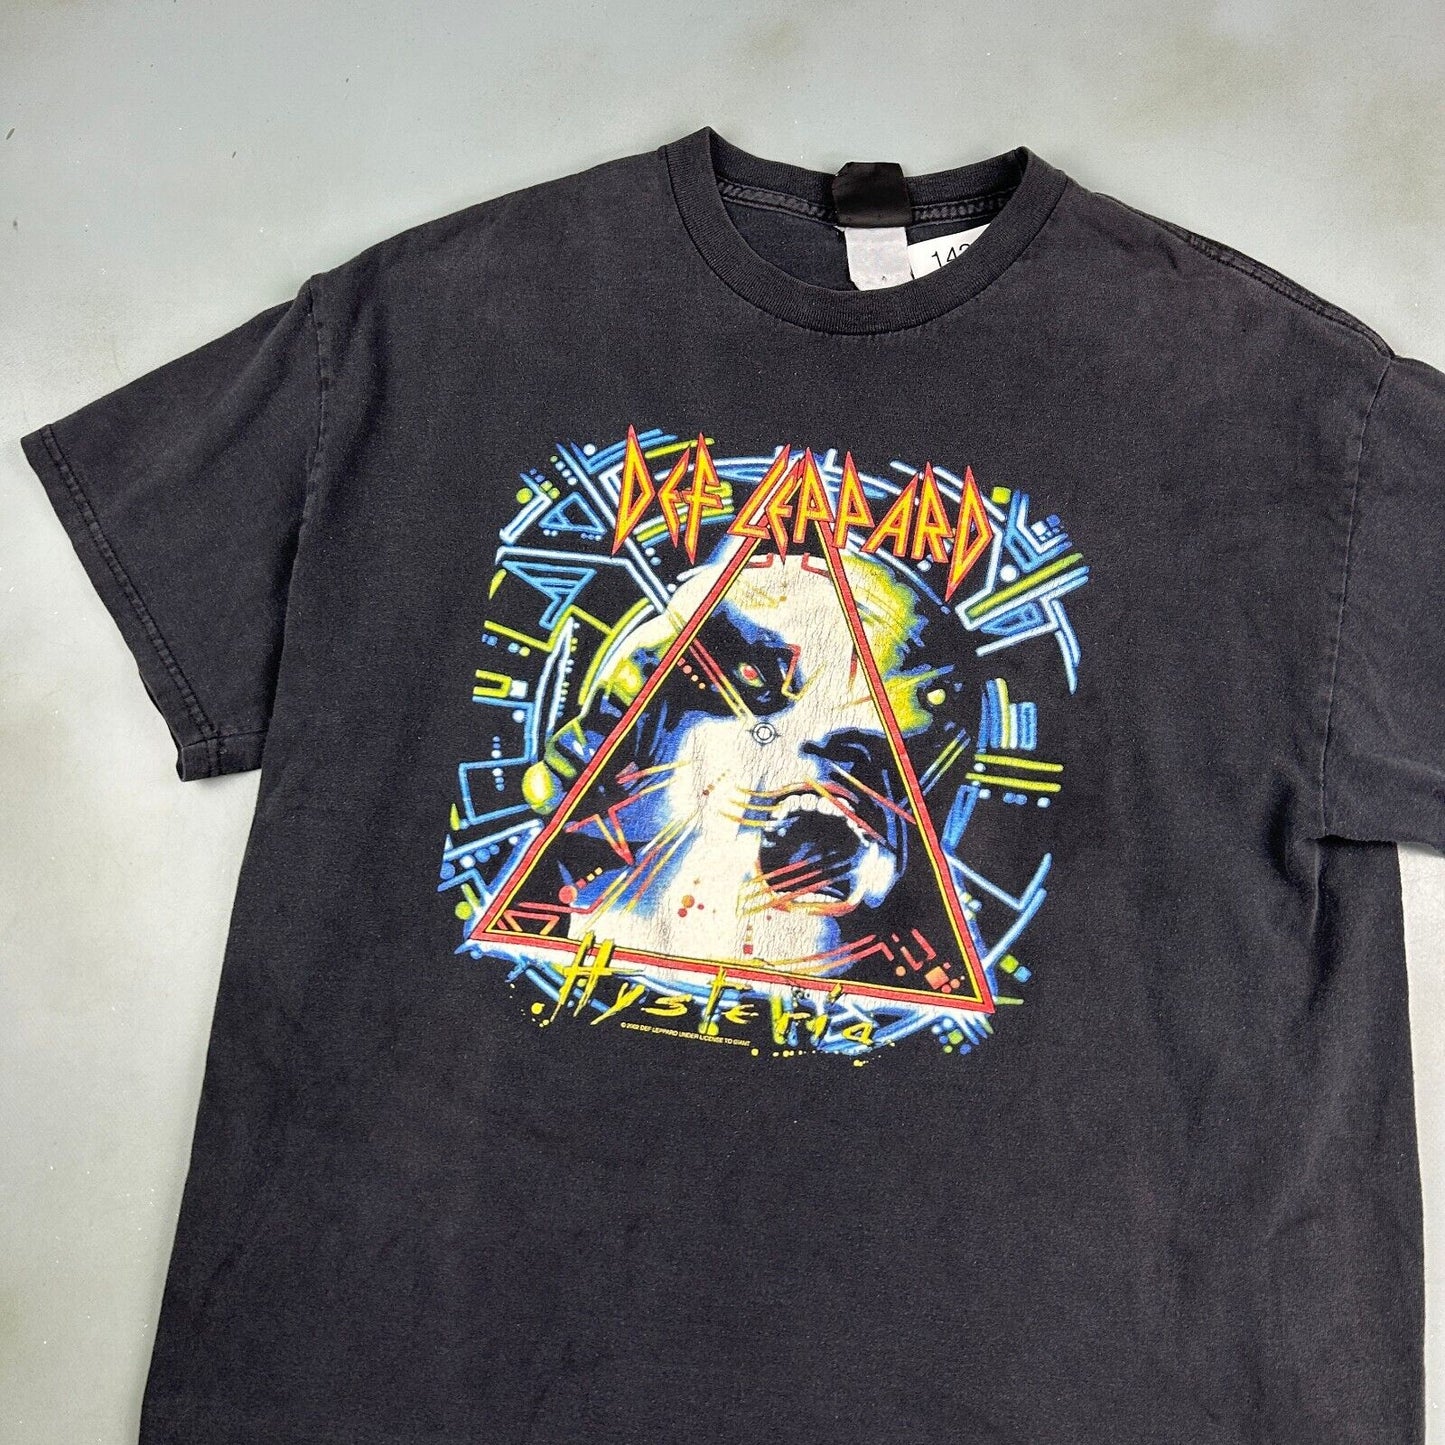 VINTAGE 2002 Def Leppard Hysteria Giant Band T-Shirt sz Large Adult